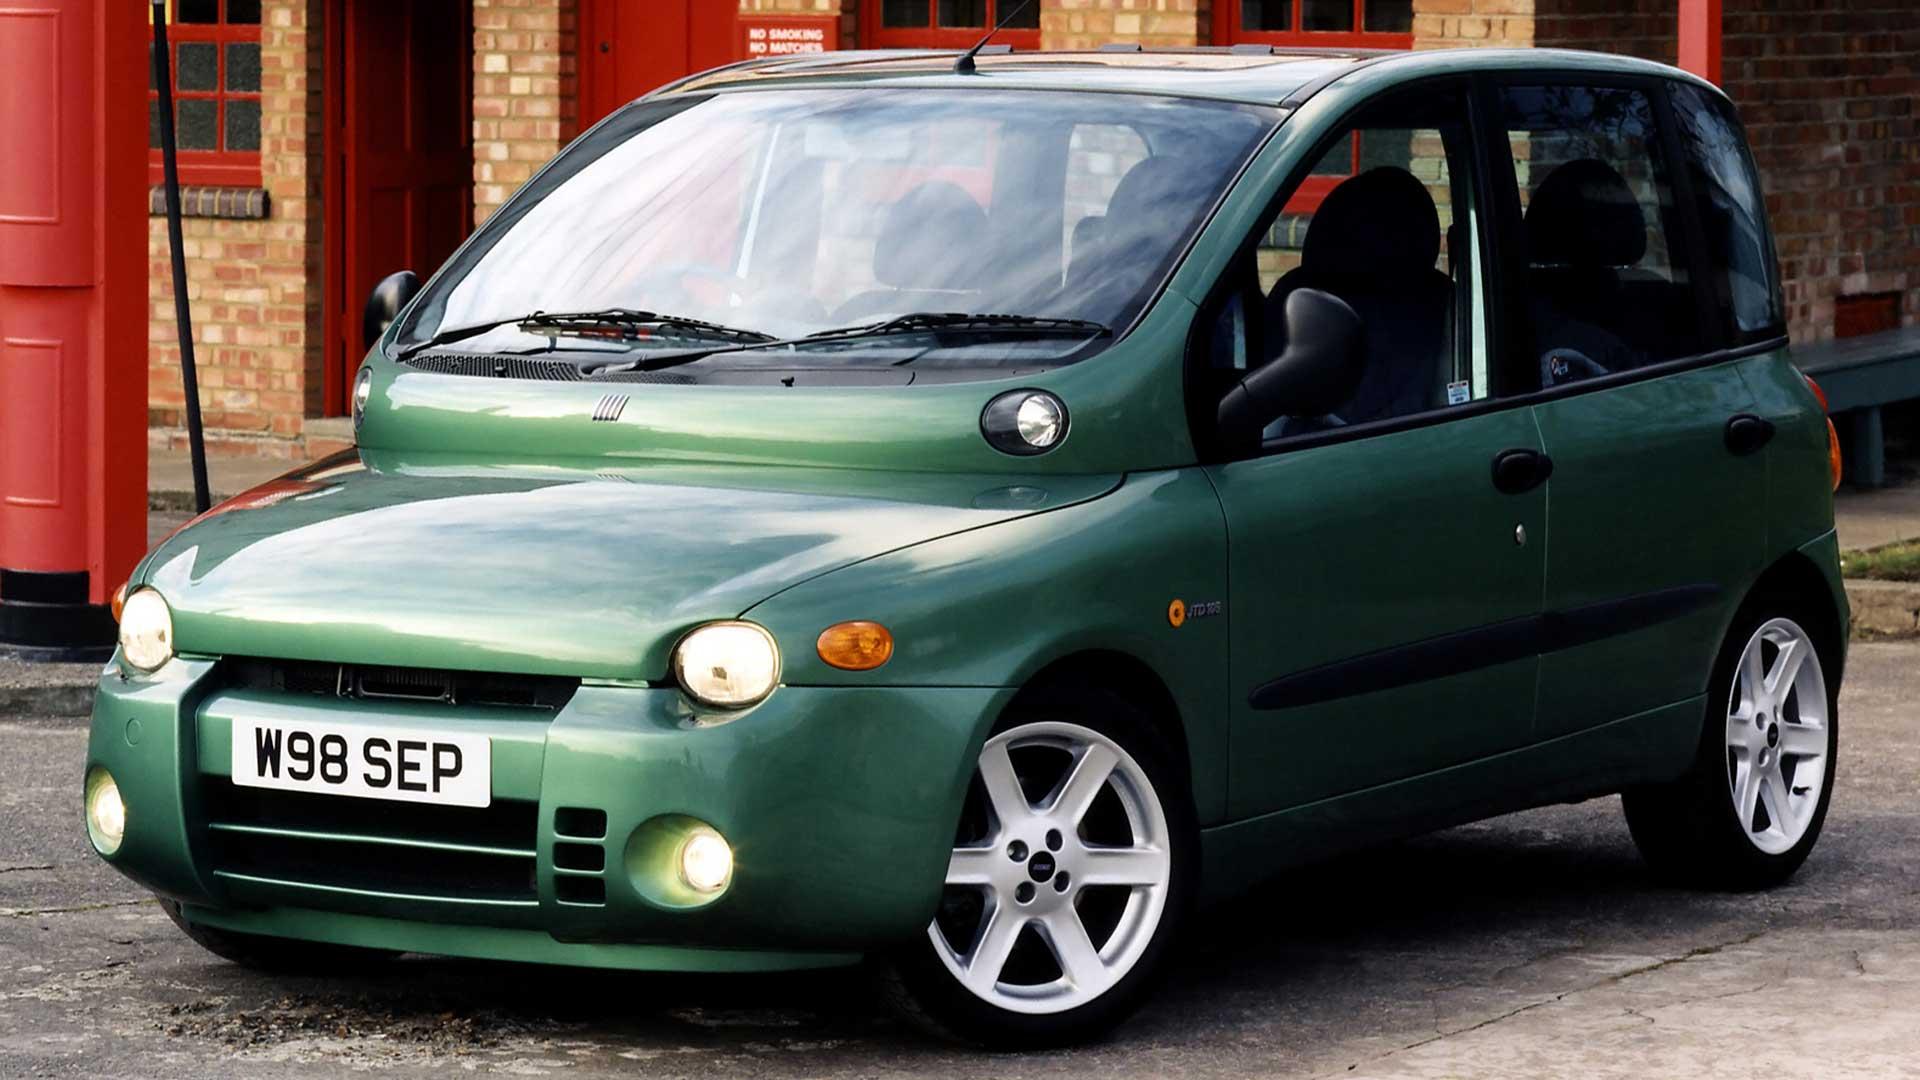 Why are Americans only now allowed to import the Fiat Multipla?